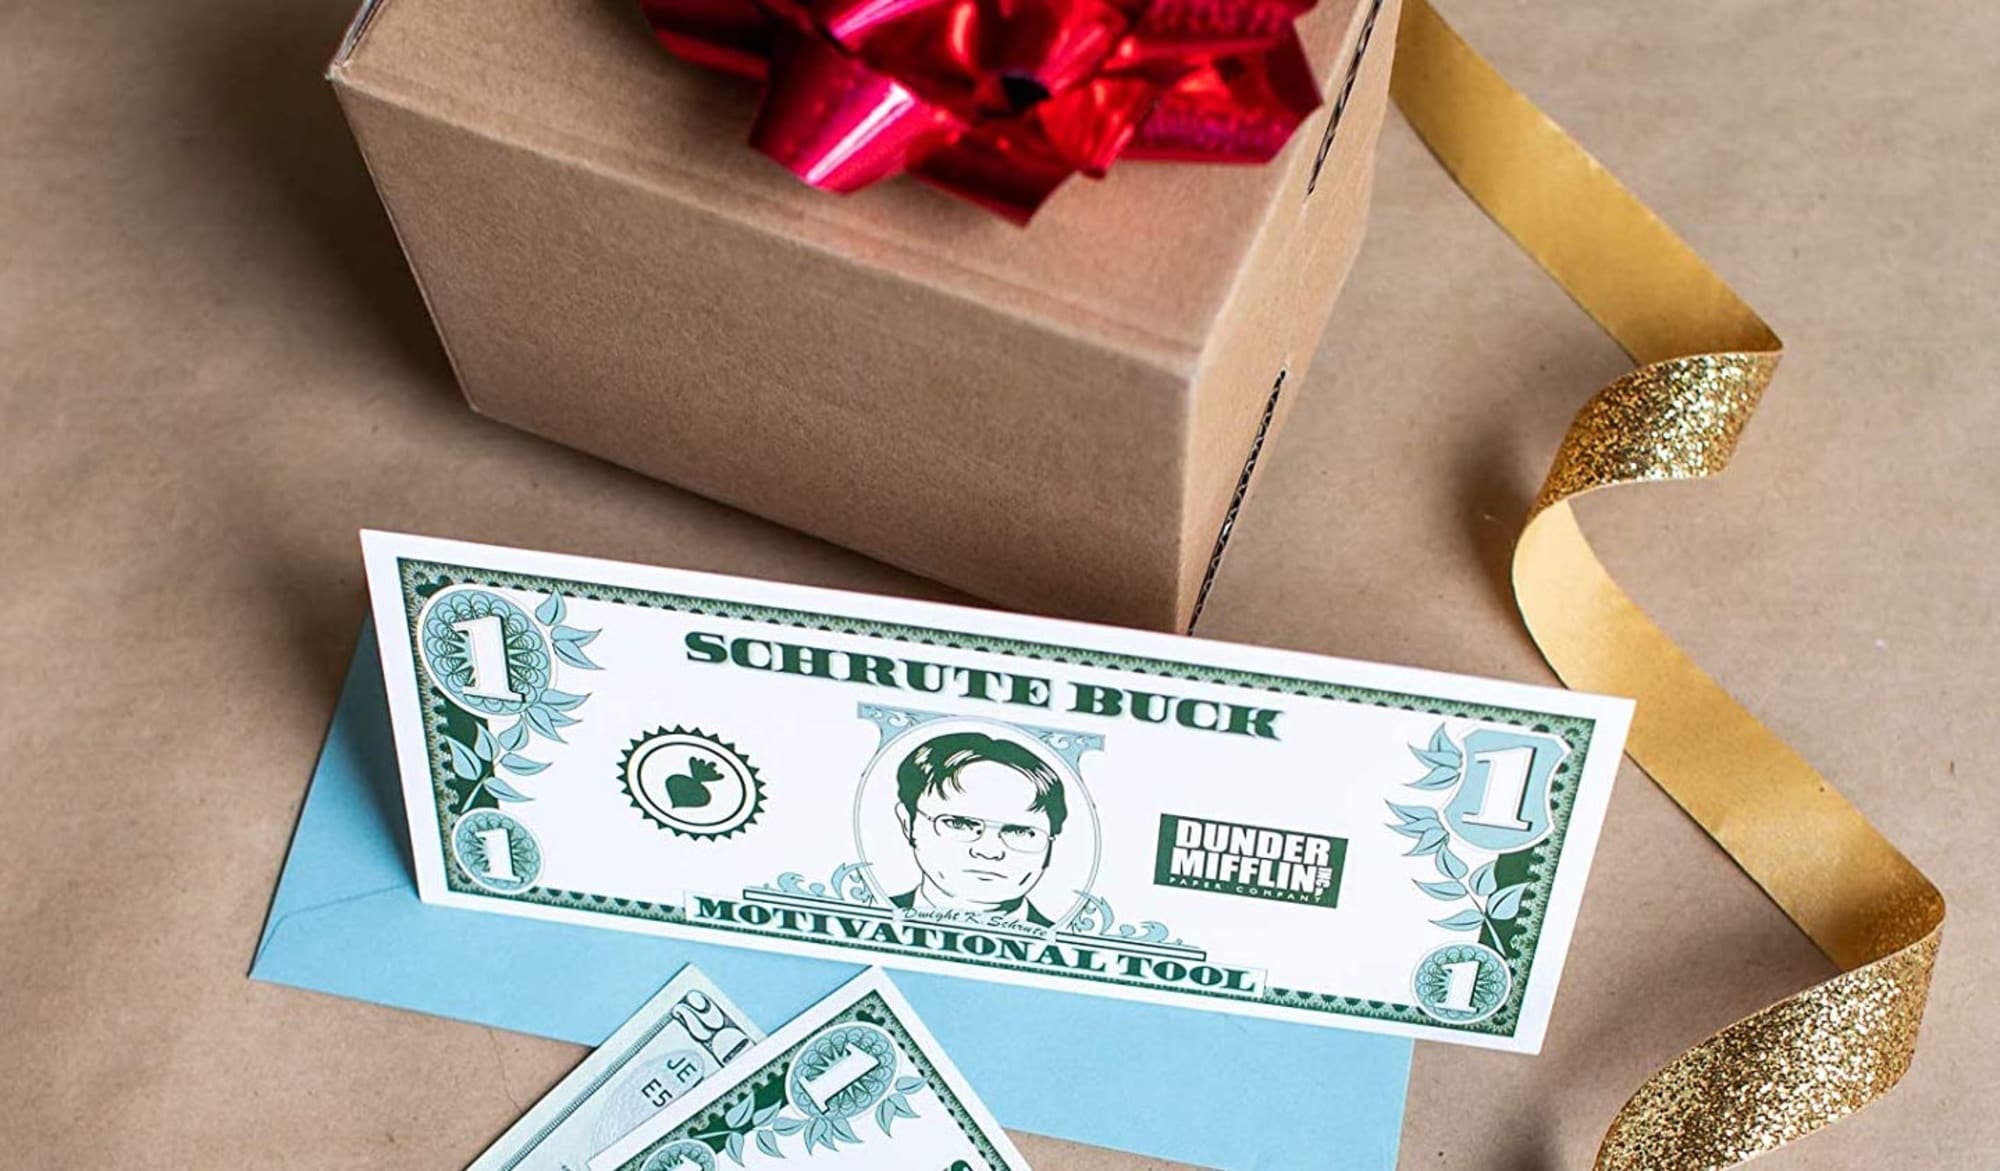 11 of best gifts to give The Office fans this holiday season